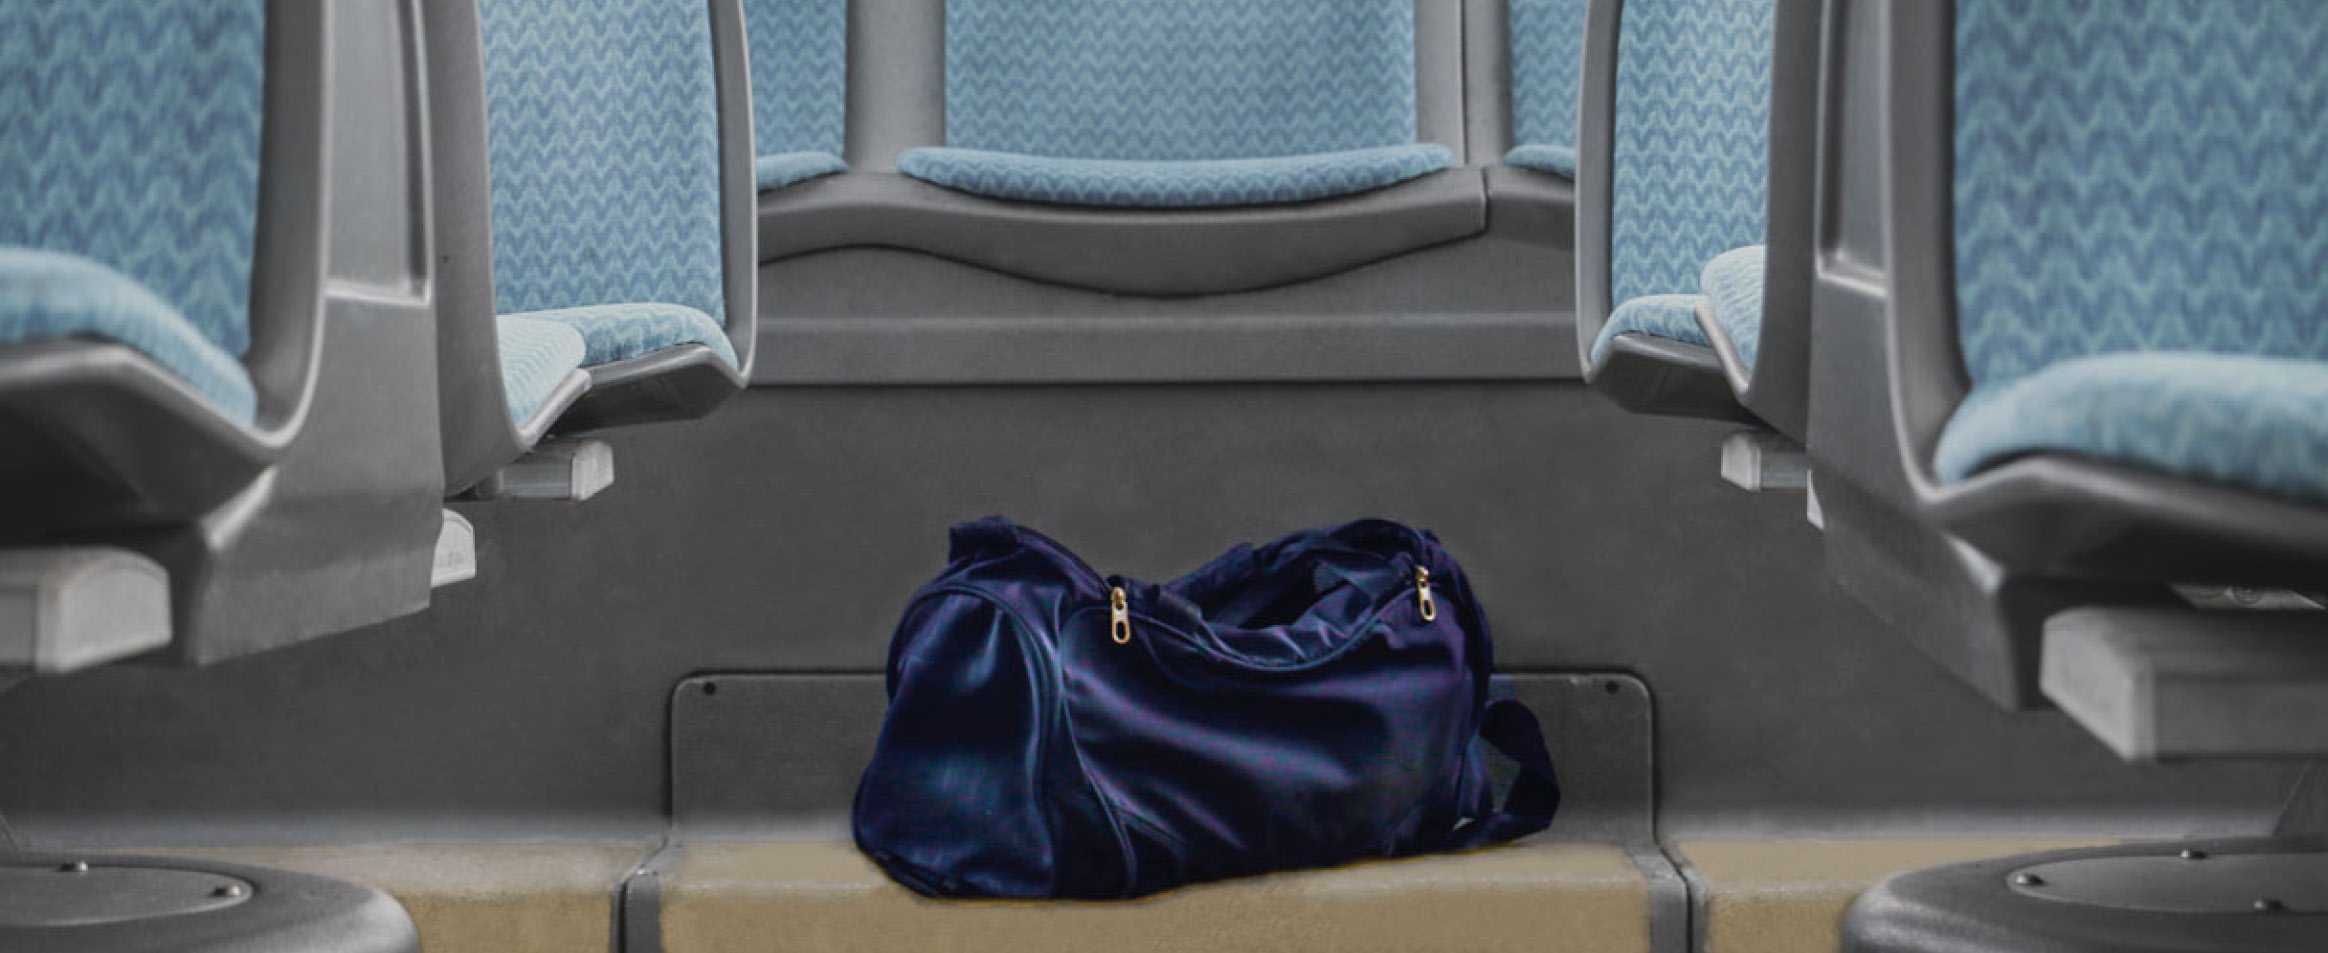 Blue duffle bag on the floor of a bus